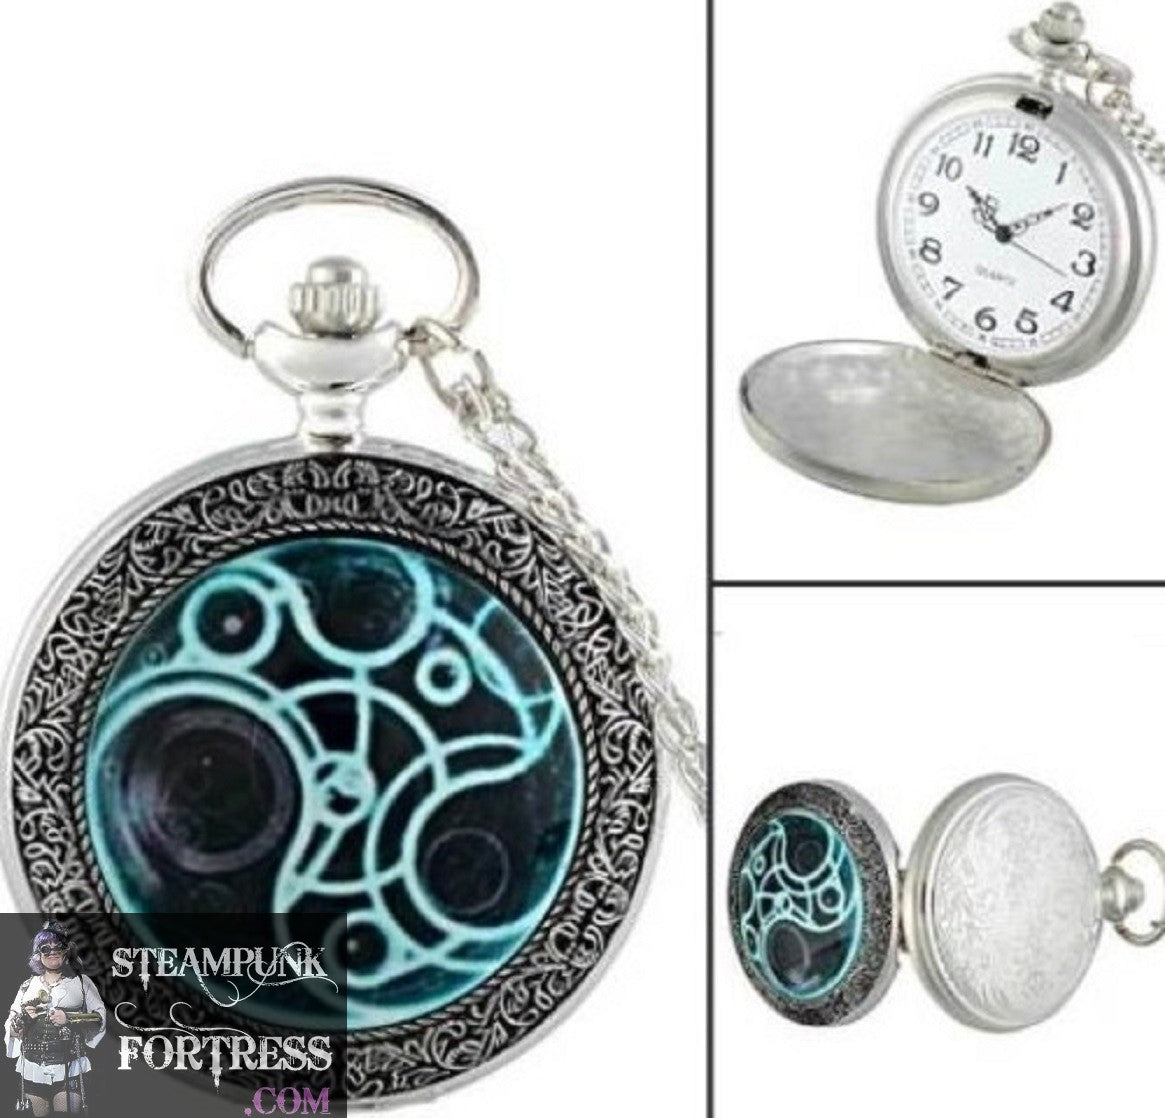 SILVER BLUE DOCTOR DR WHO GALLIFREY HOME PLANET WORKING POCKETWATCH POCKET WATCH WITH CHAIN AND CLASP - MASS PRODUCED